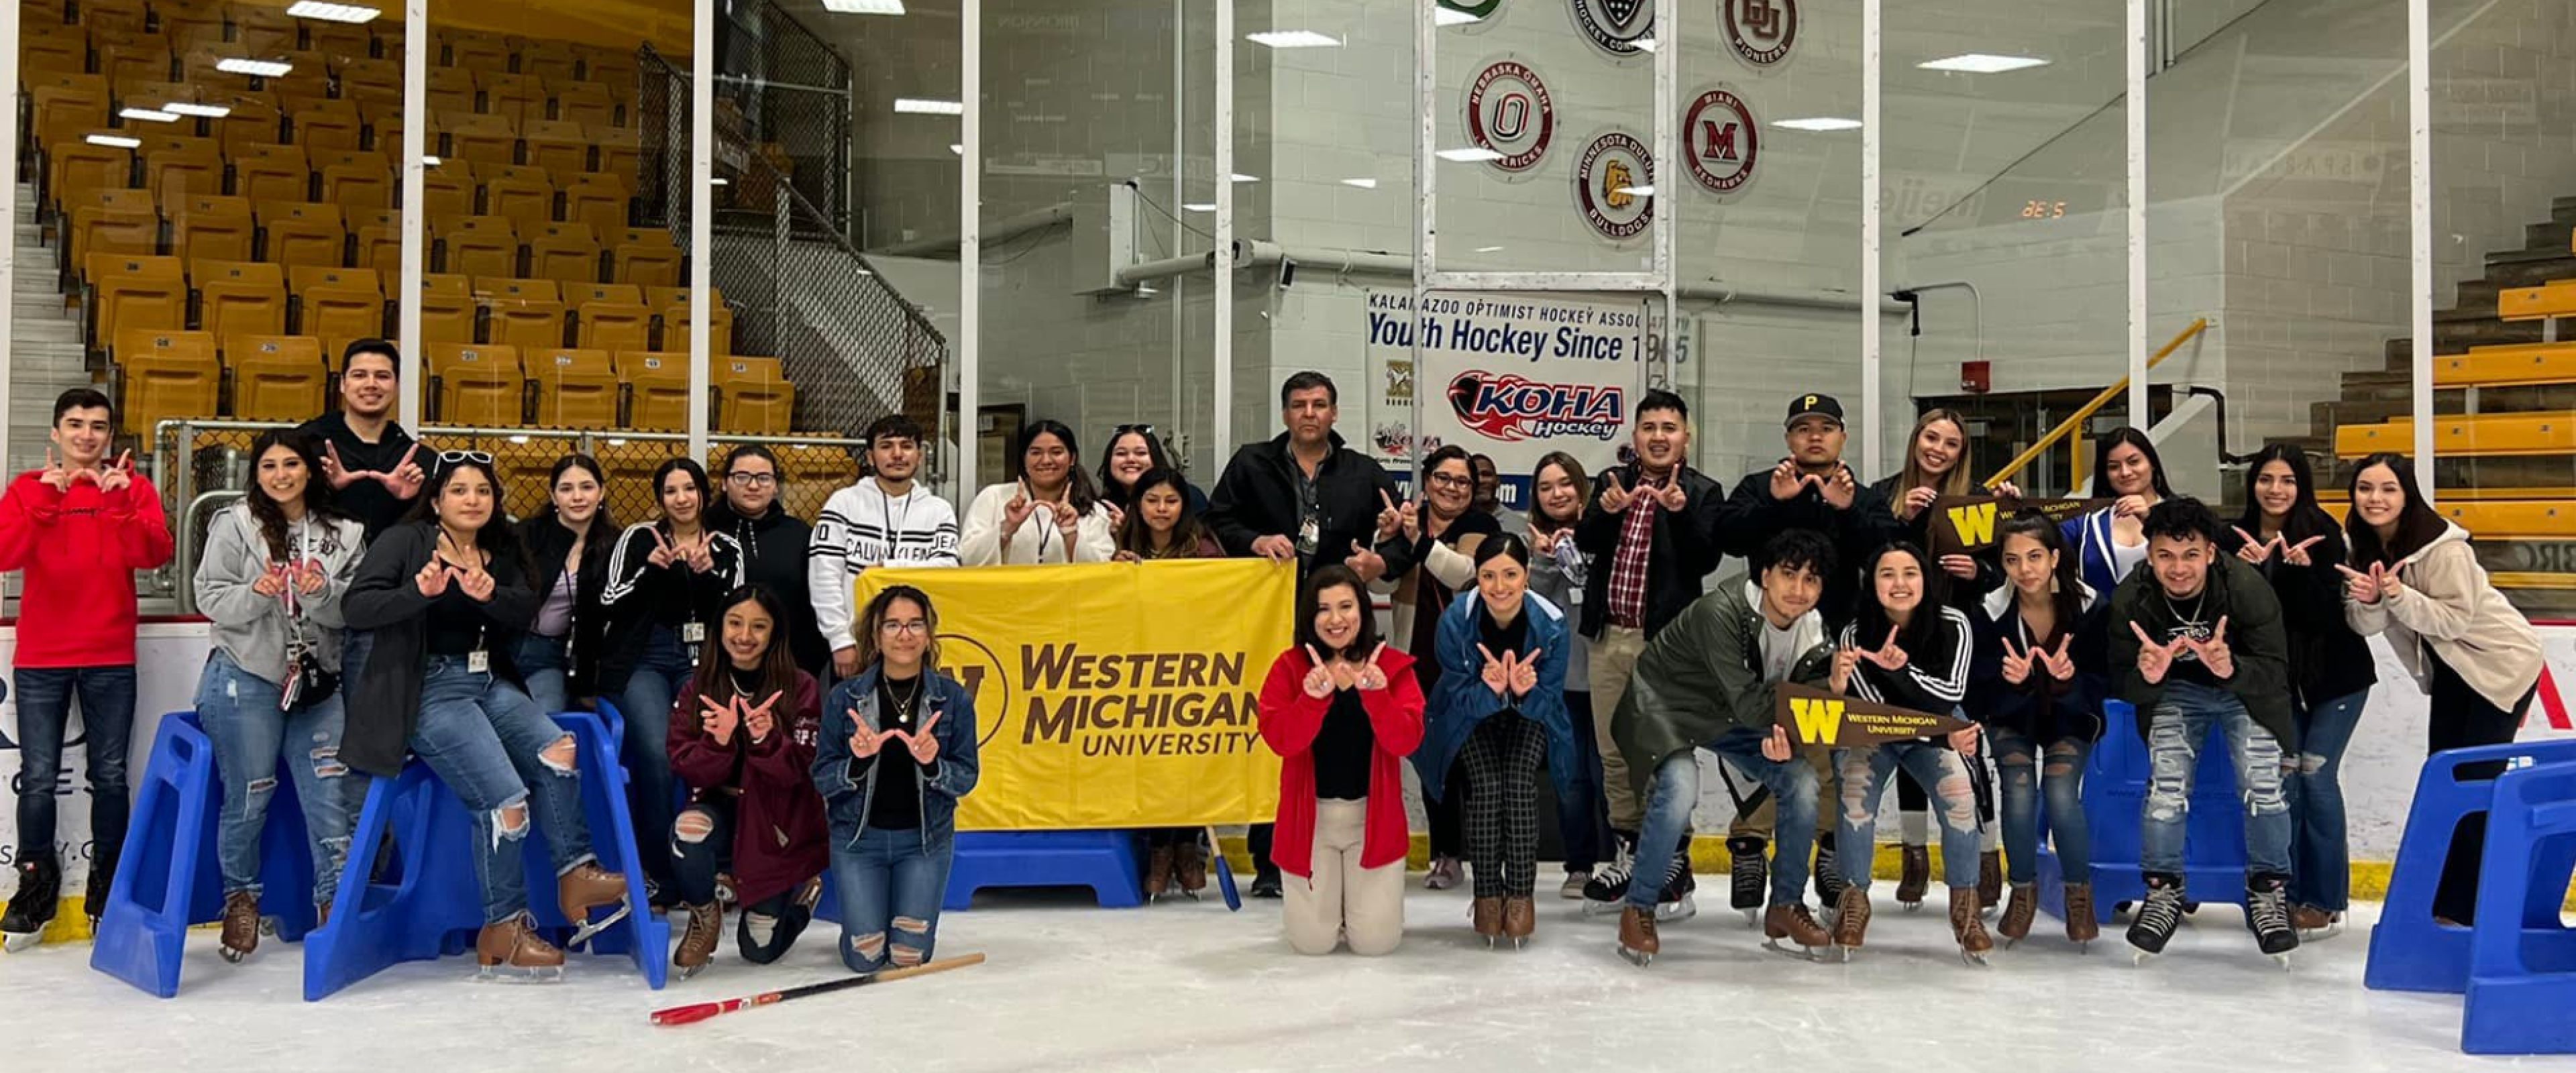 CAMP staff, scholars, and future scholars posing for a group photo in a ice hockey rink.